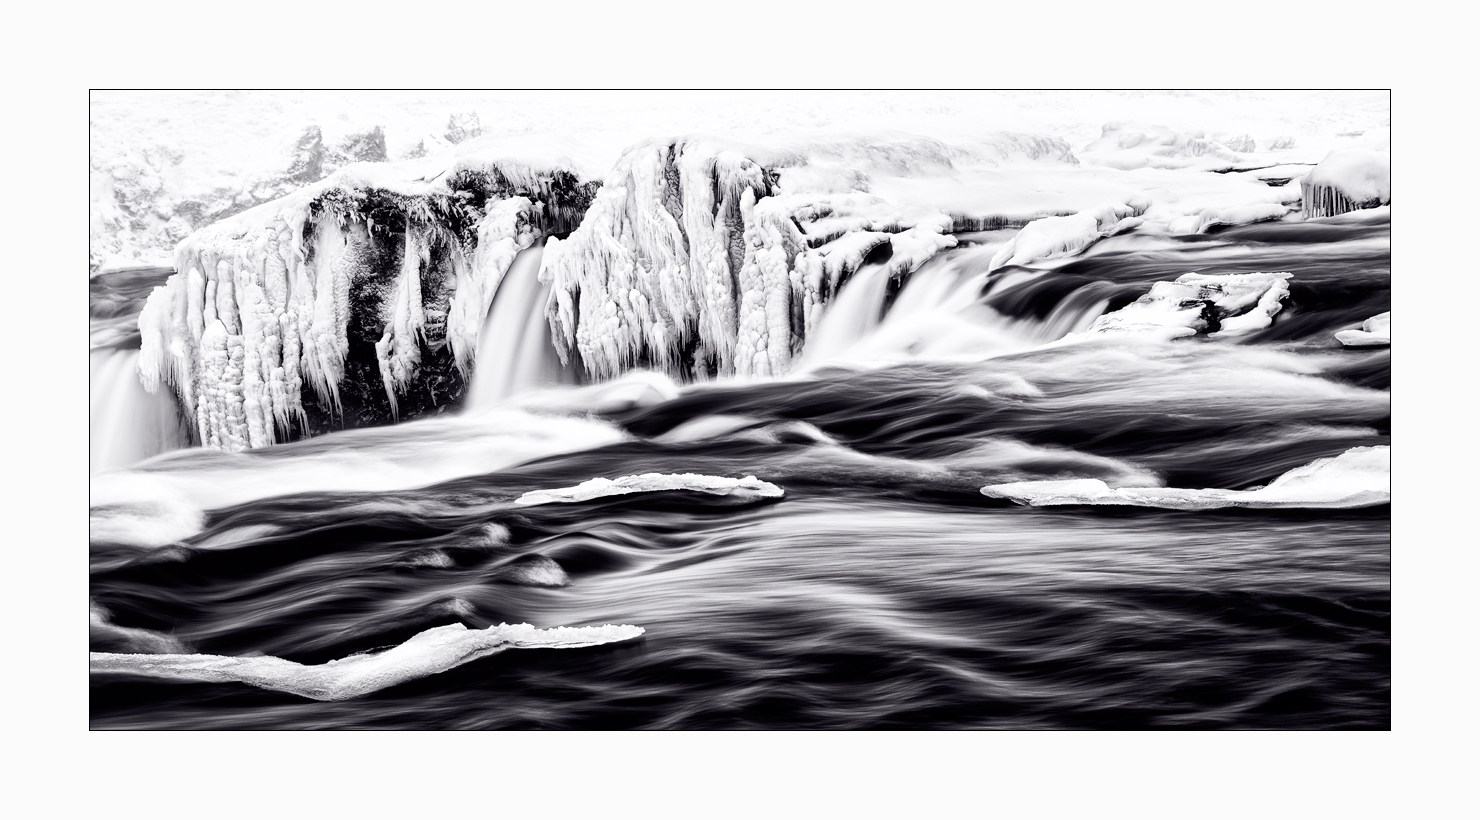 Fine art image of the upper waters of Godafoss in winter in Iceland.